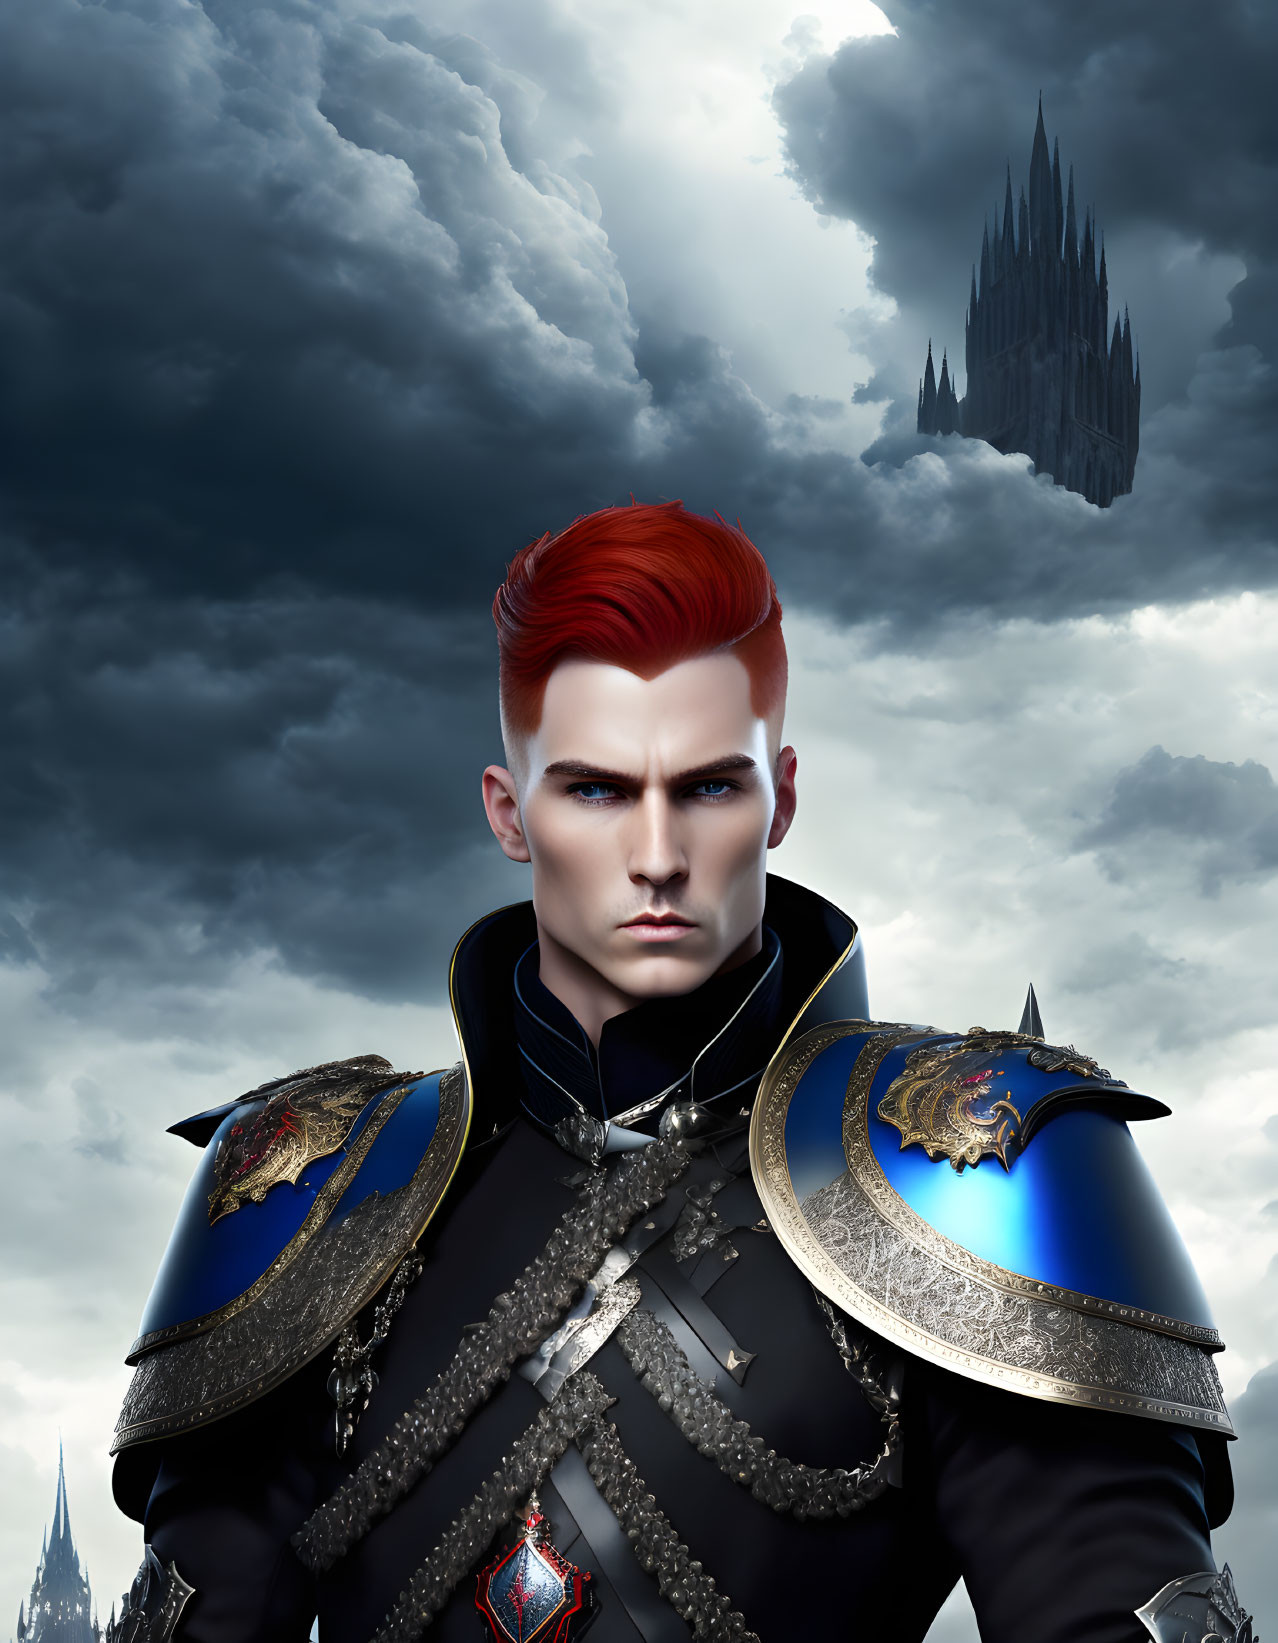 Male character in red hair and medieval armor under stormy sky with castle.